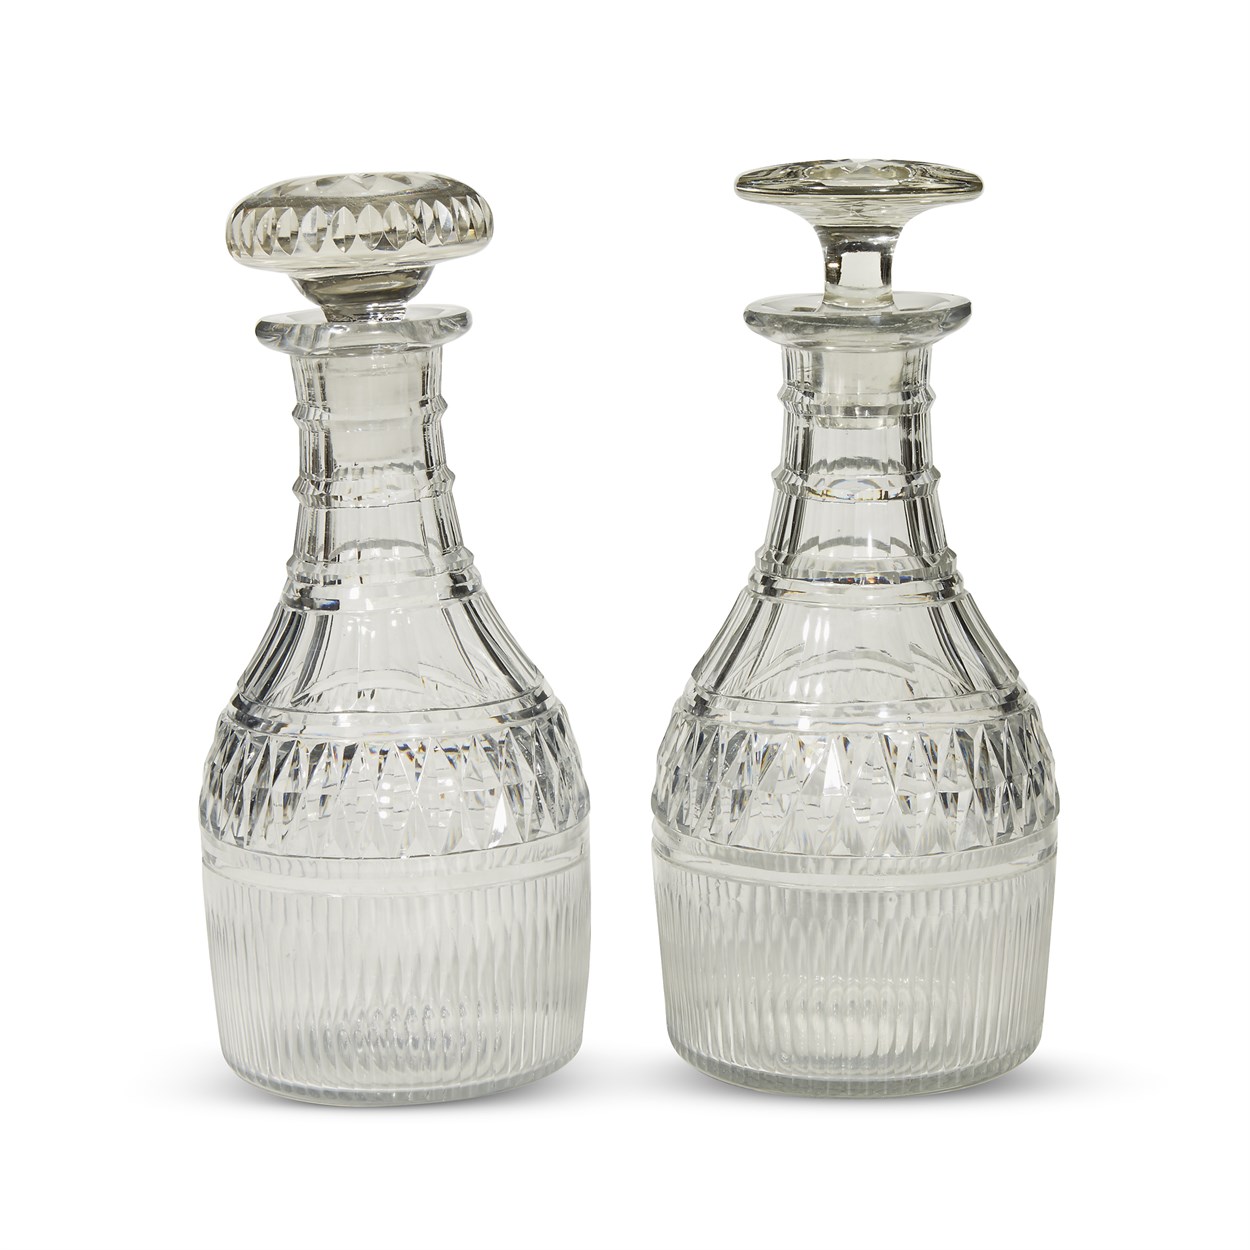 Lot 100 - A pair of Anglo-Irish Regency cut glass stoppered decanters